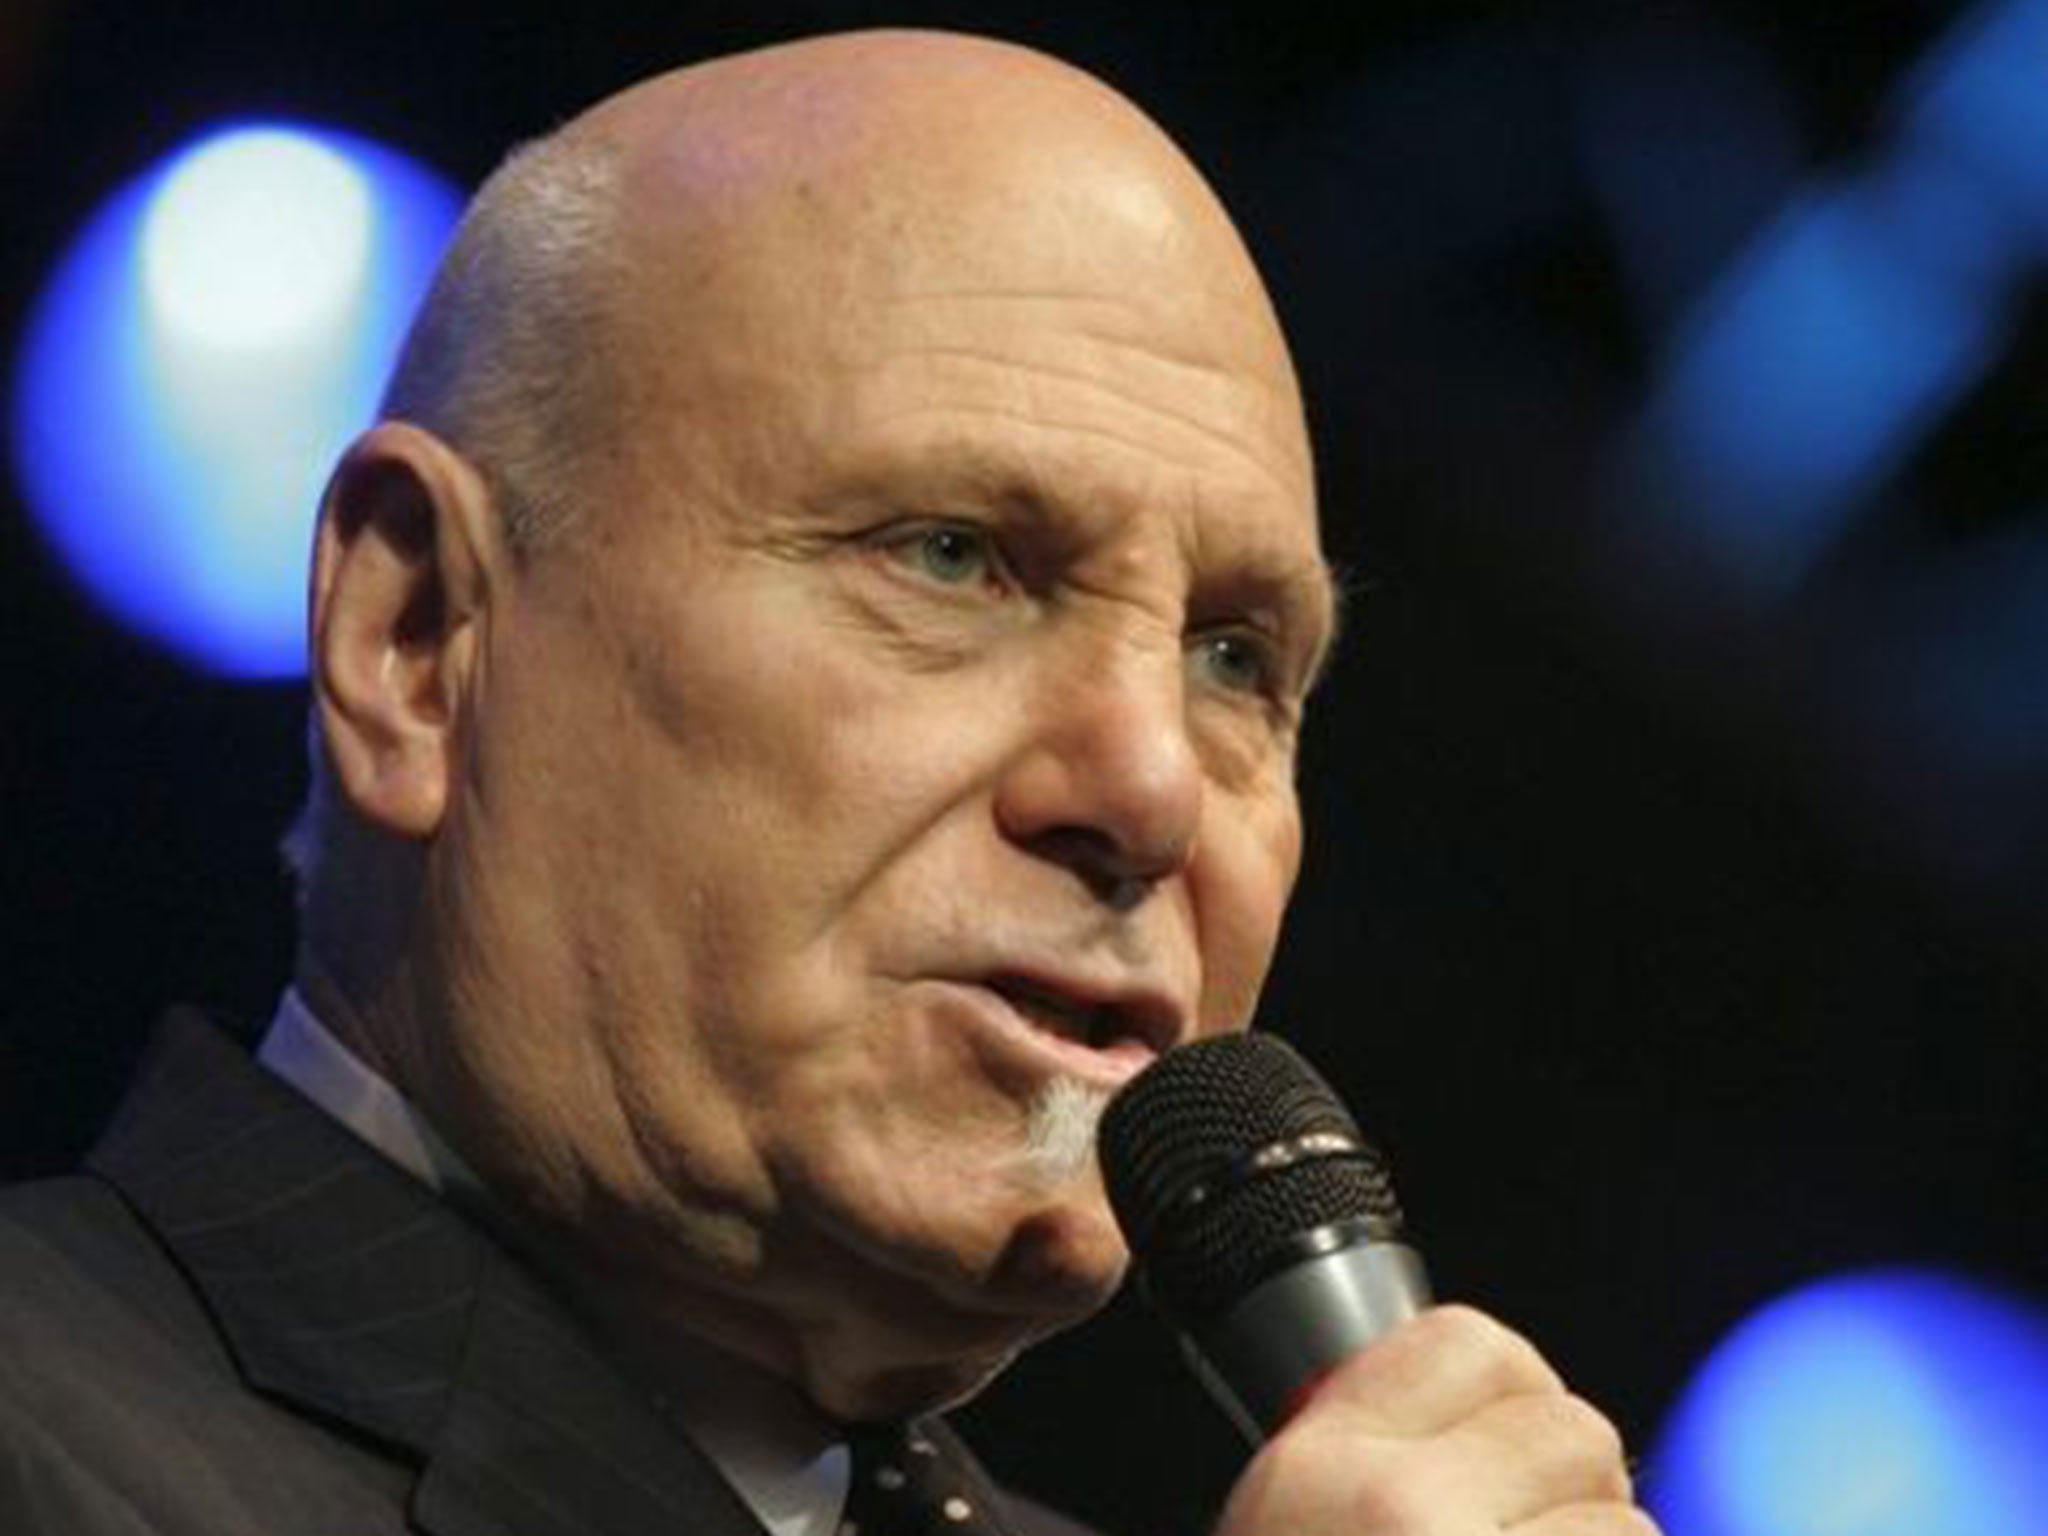 Tim Hauser performing on stage with The Manhattan Transfer at the Avo Session in Basel, Switzerland, in November 2006